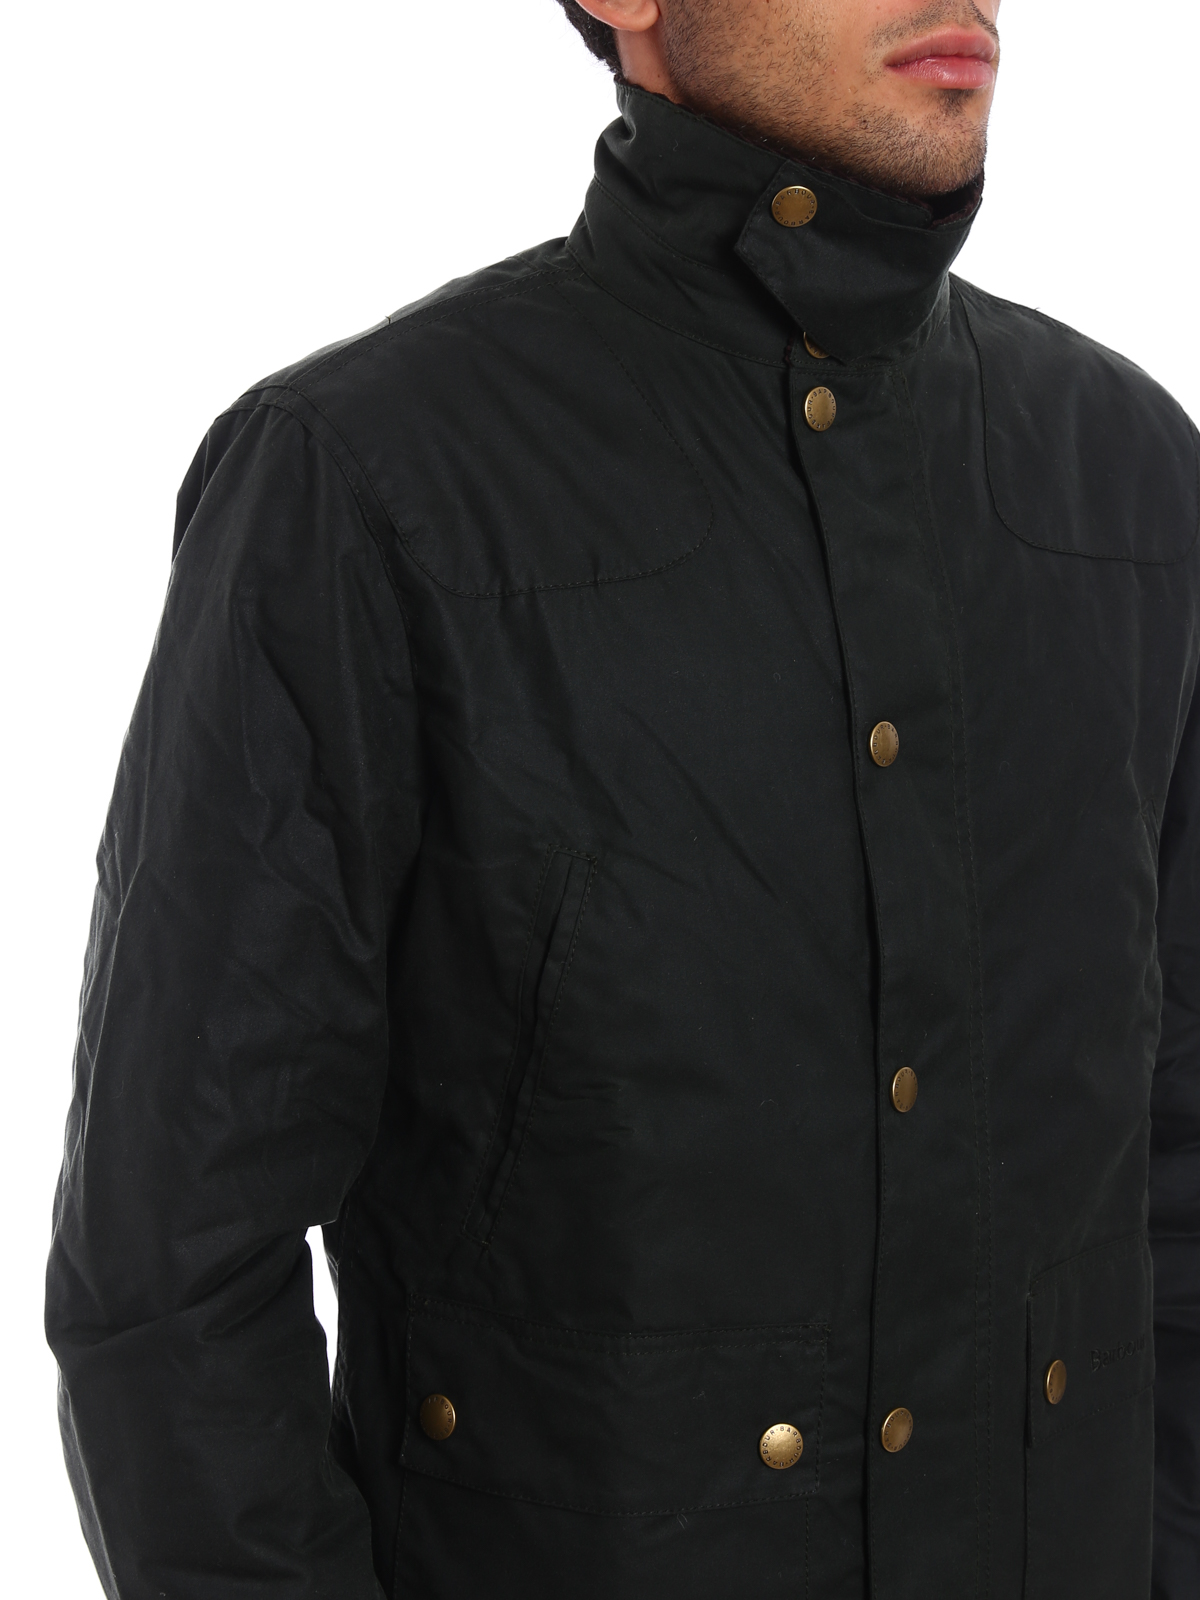 barbour reelin wax jacket navy - Online Discount Shop for Electronics,  Apparel, Toys, Books, Games, Computers, Shoes, Jewelry, Watches, Baby  Products, Sports & Outdoors, Office Products, Bed & Bath, Furniture, Tools,  Hardware